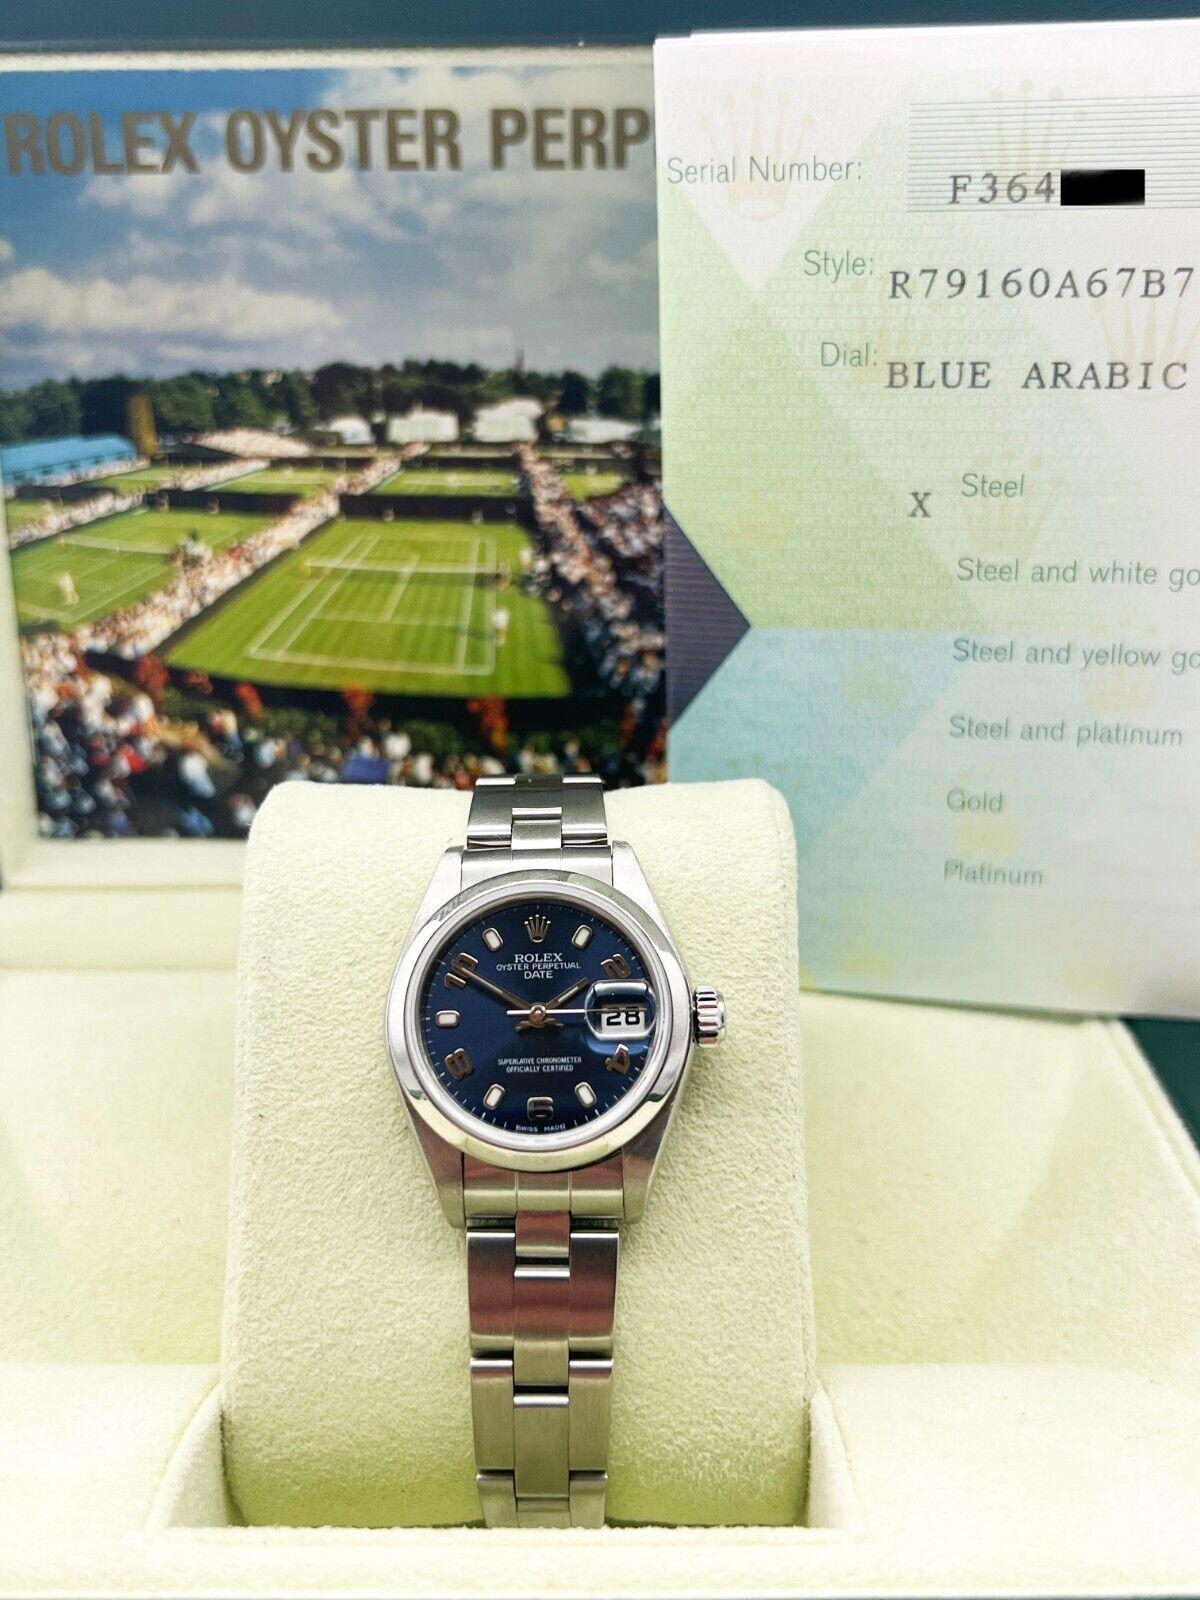 Style Number: 79160

Serial: F364***

Year: 2006

Model: Date

Case Material: Stainless Steel

Band:  Stainless Steel

Bezel:  Stainless Steel

Dial: Blue

Face: Sapphire Crystal 

Case Size: 26mm 

Includes: 

-Rolex Box & Paper

-Certified